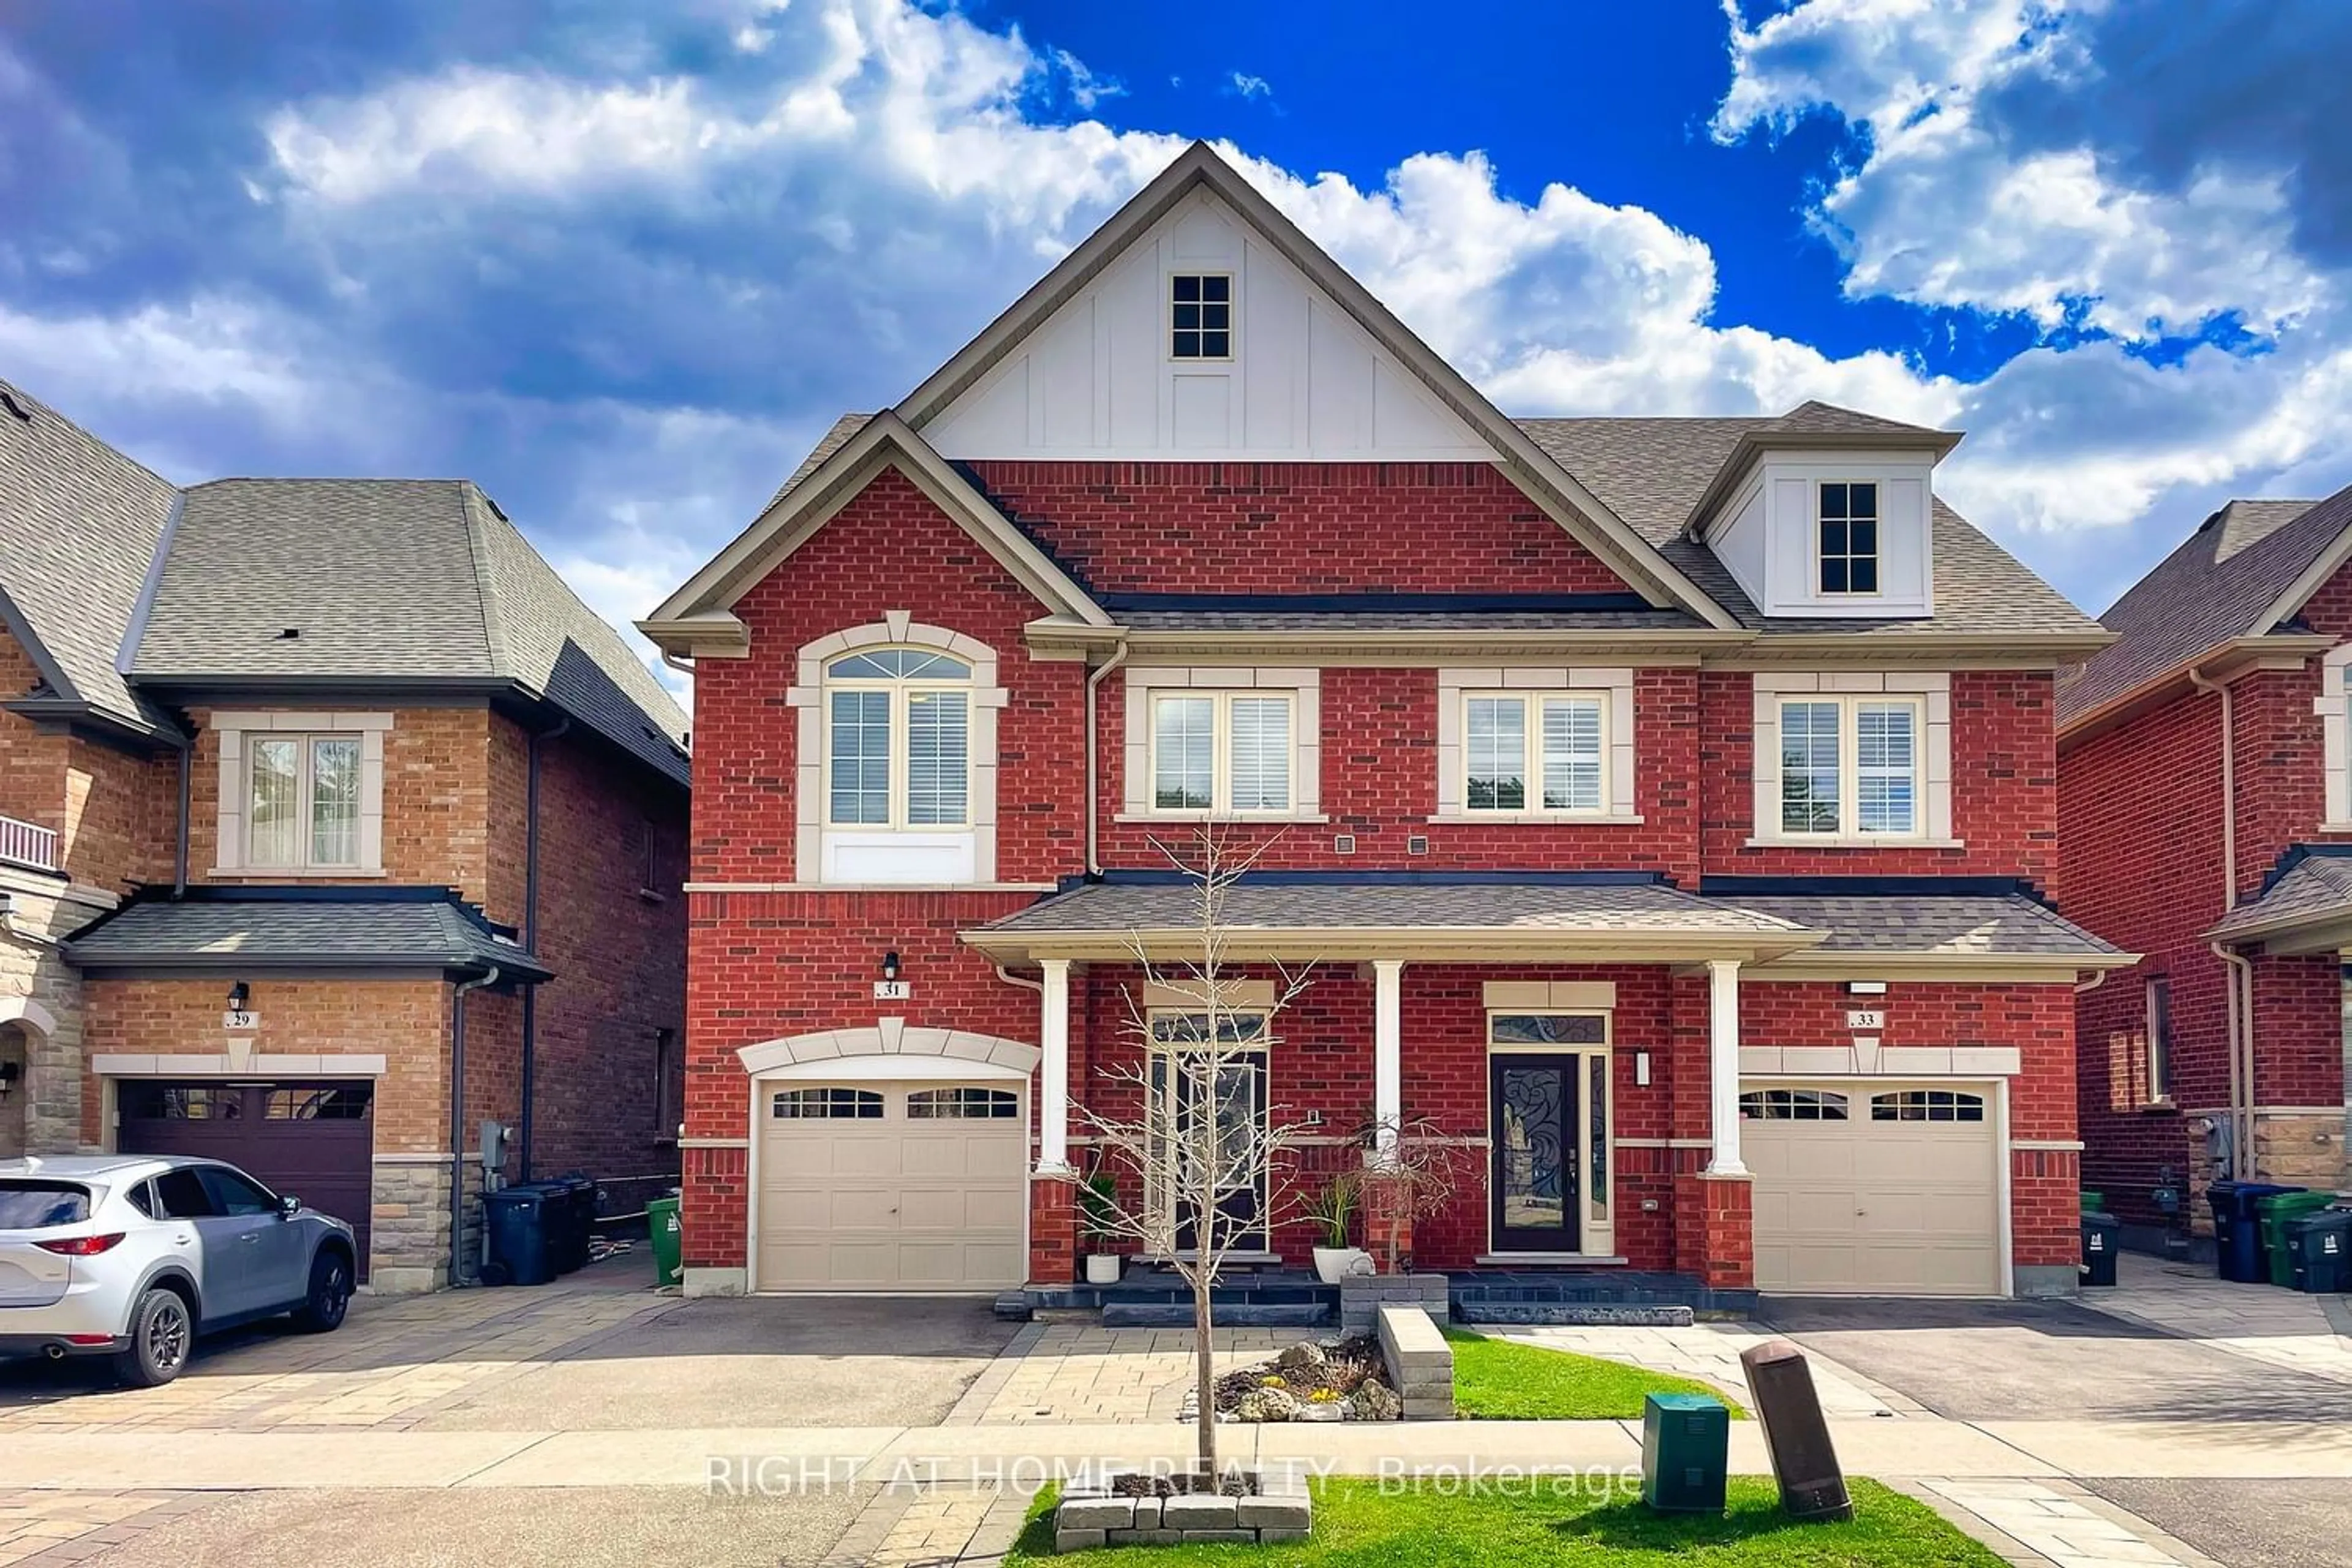 Home with brick exterior material for 31 Goldthread Terr, Toronto Ontario M3H 0B9